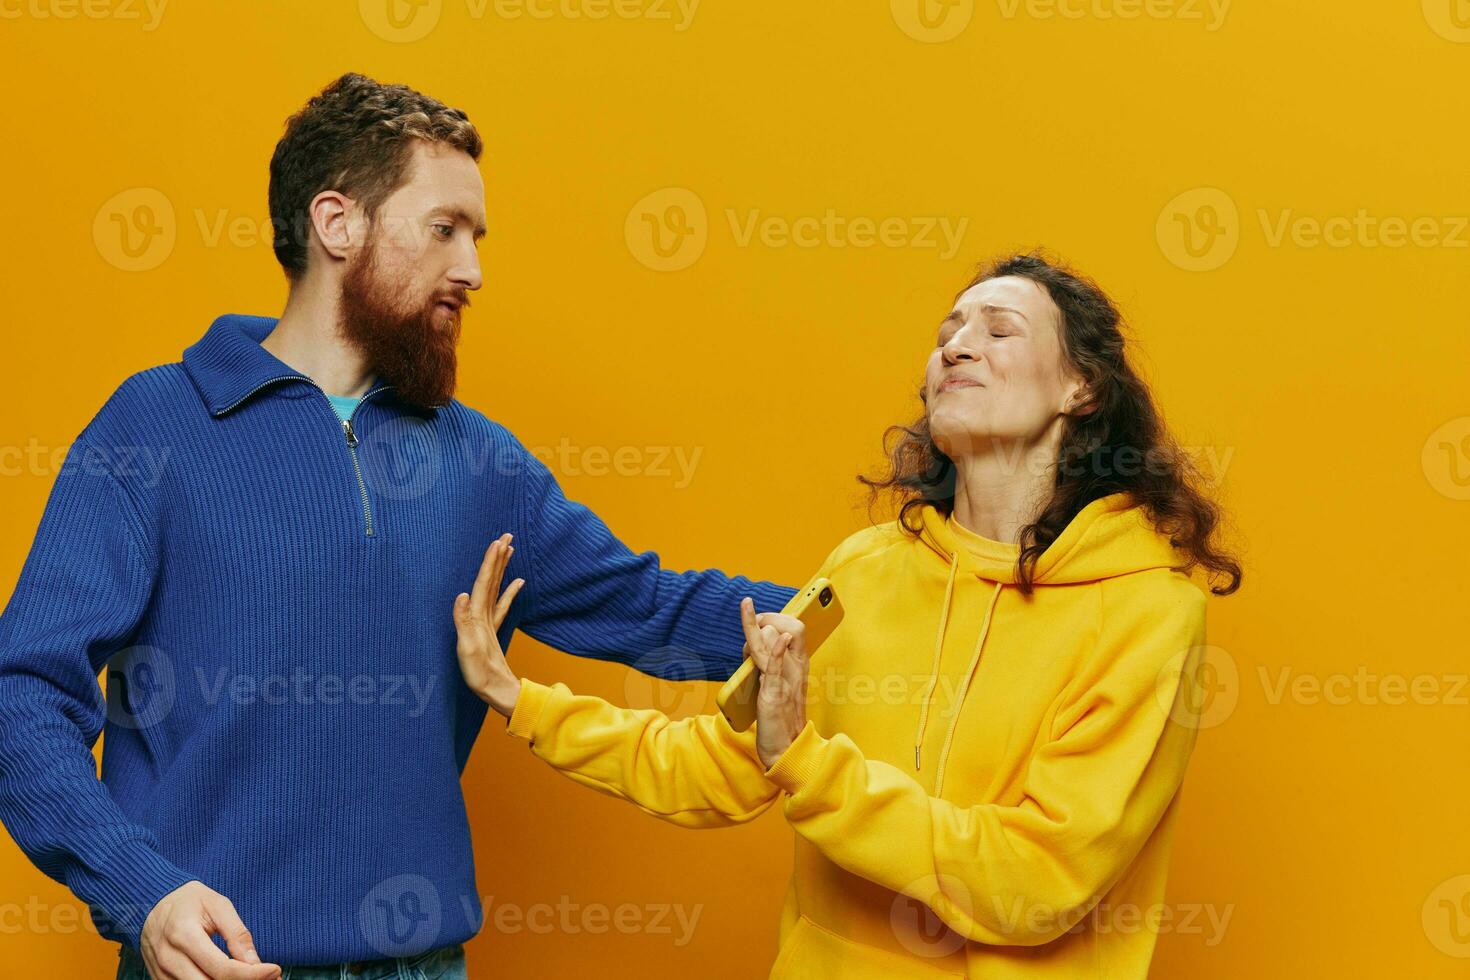 Woman man cheerful couple with phones in hand social networking and communication crooked smile fun and fight, in yellow background. The concept of real family relationships, freelancers, work online. photo